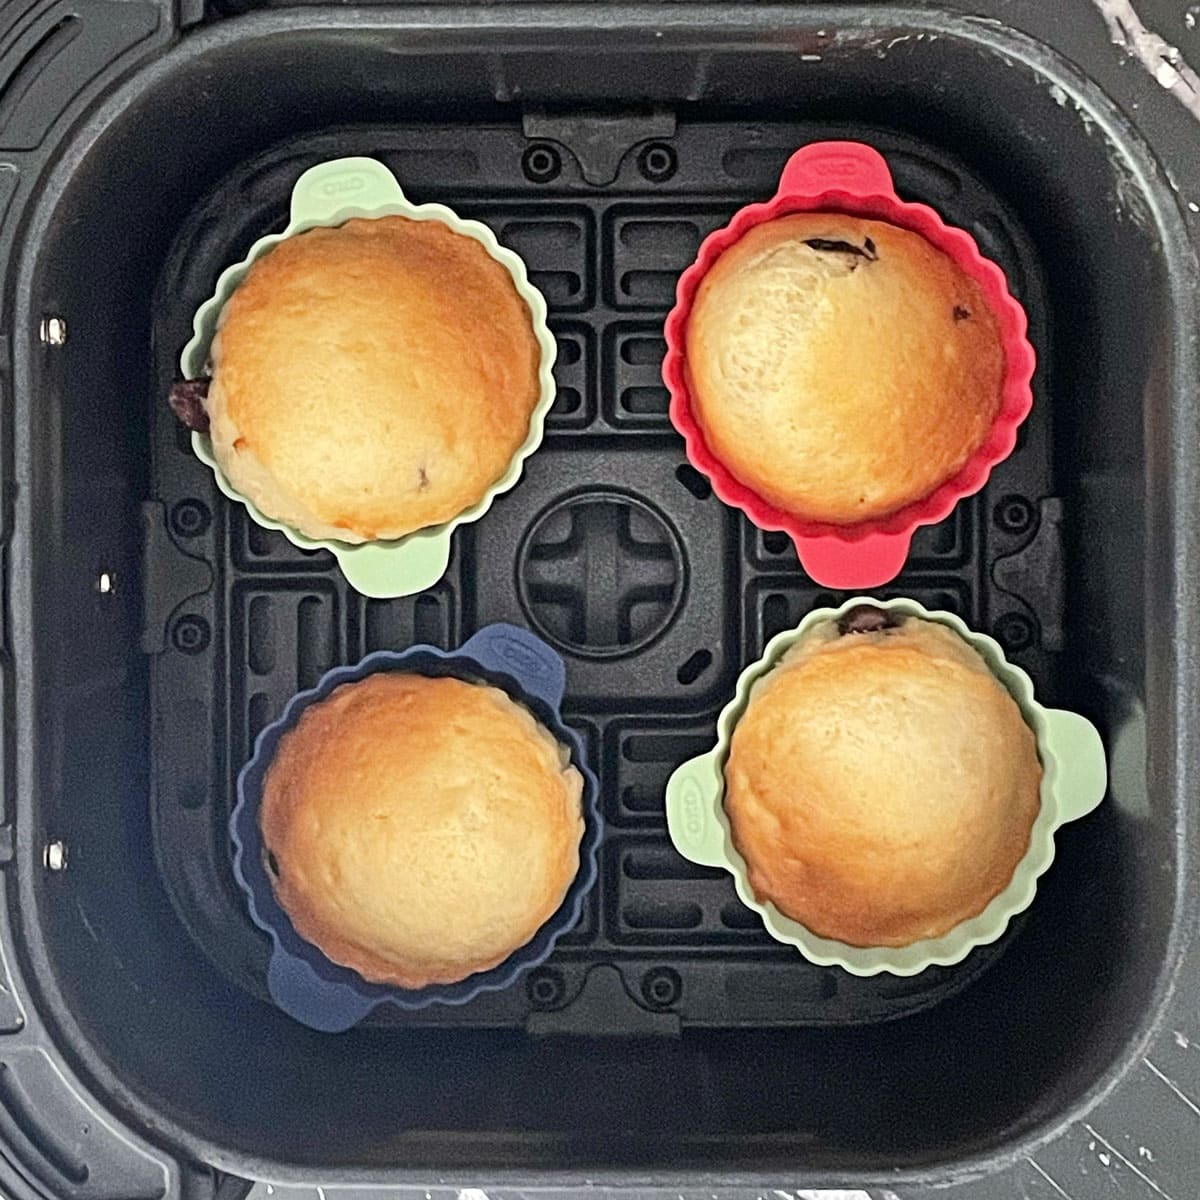 Banana muffin baked in Air fryer tub.